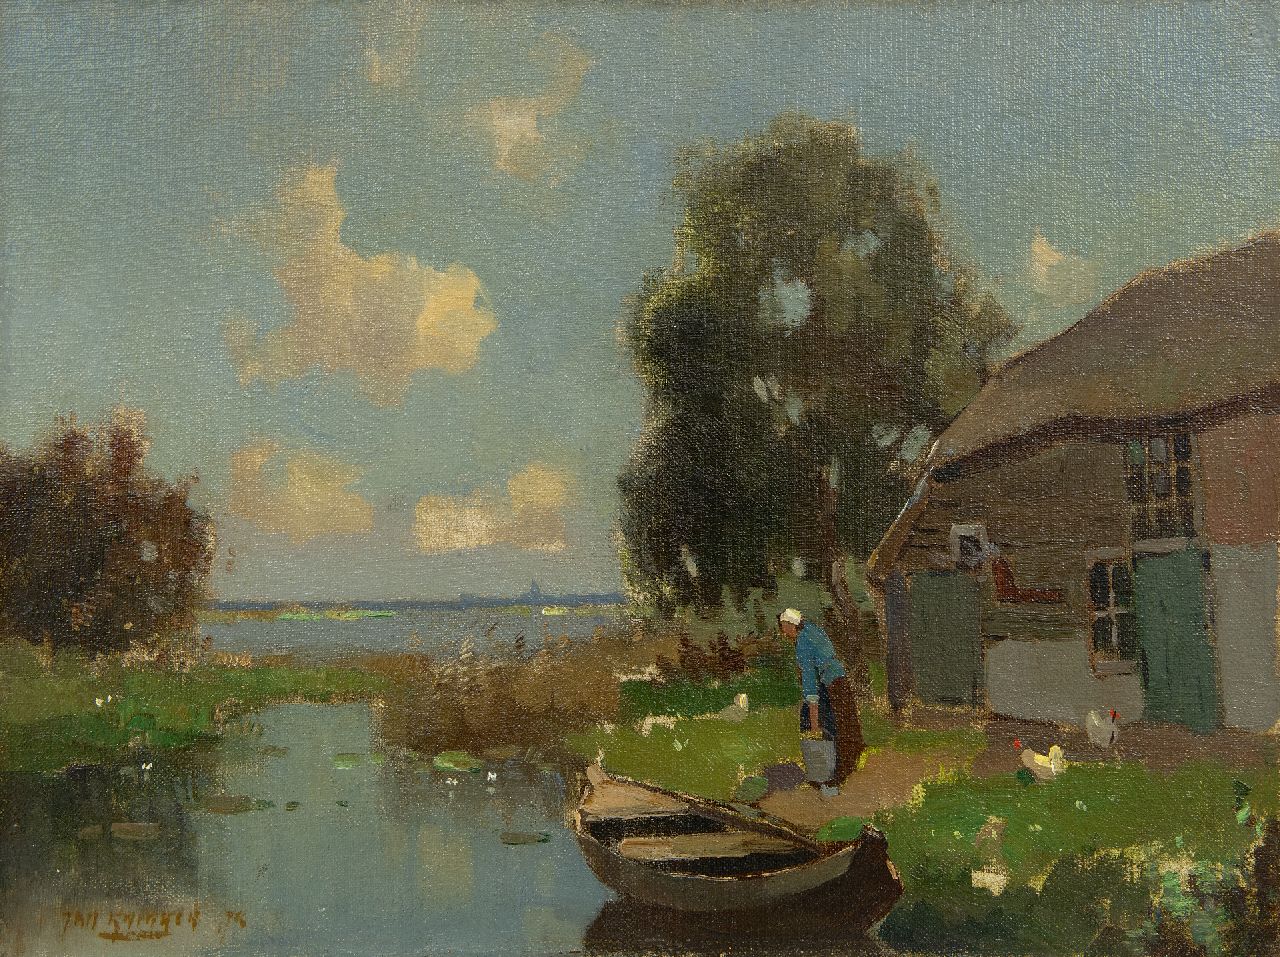 Knikker jr. J.S.  | 'Jan' Simon  Knikker jr. | Paintings offered for sale | Farmyard on a lake, oil on canvas 30.5 x 40.4 cm, signed l.l. and dated '75